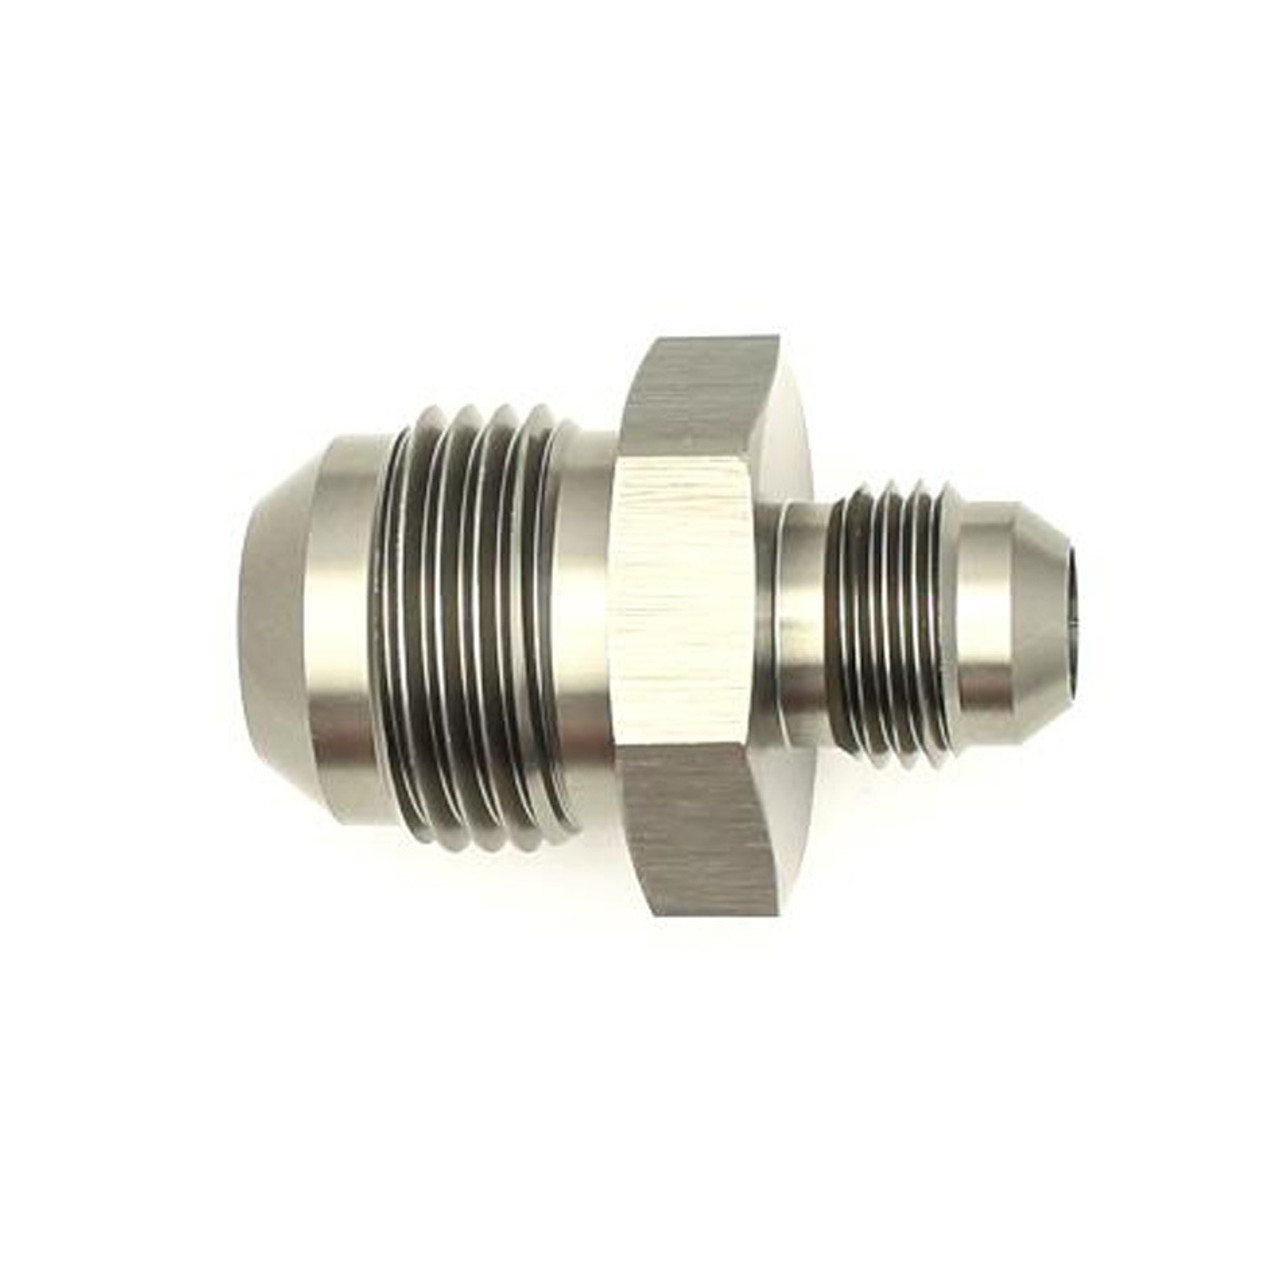 #10 to #6 Union Reducer Fitting DWK6-02-0205